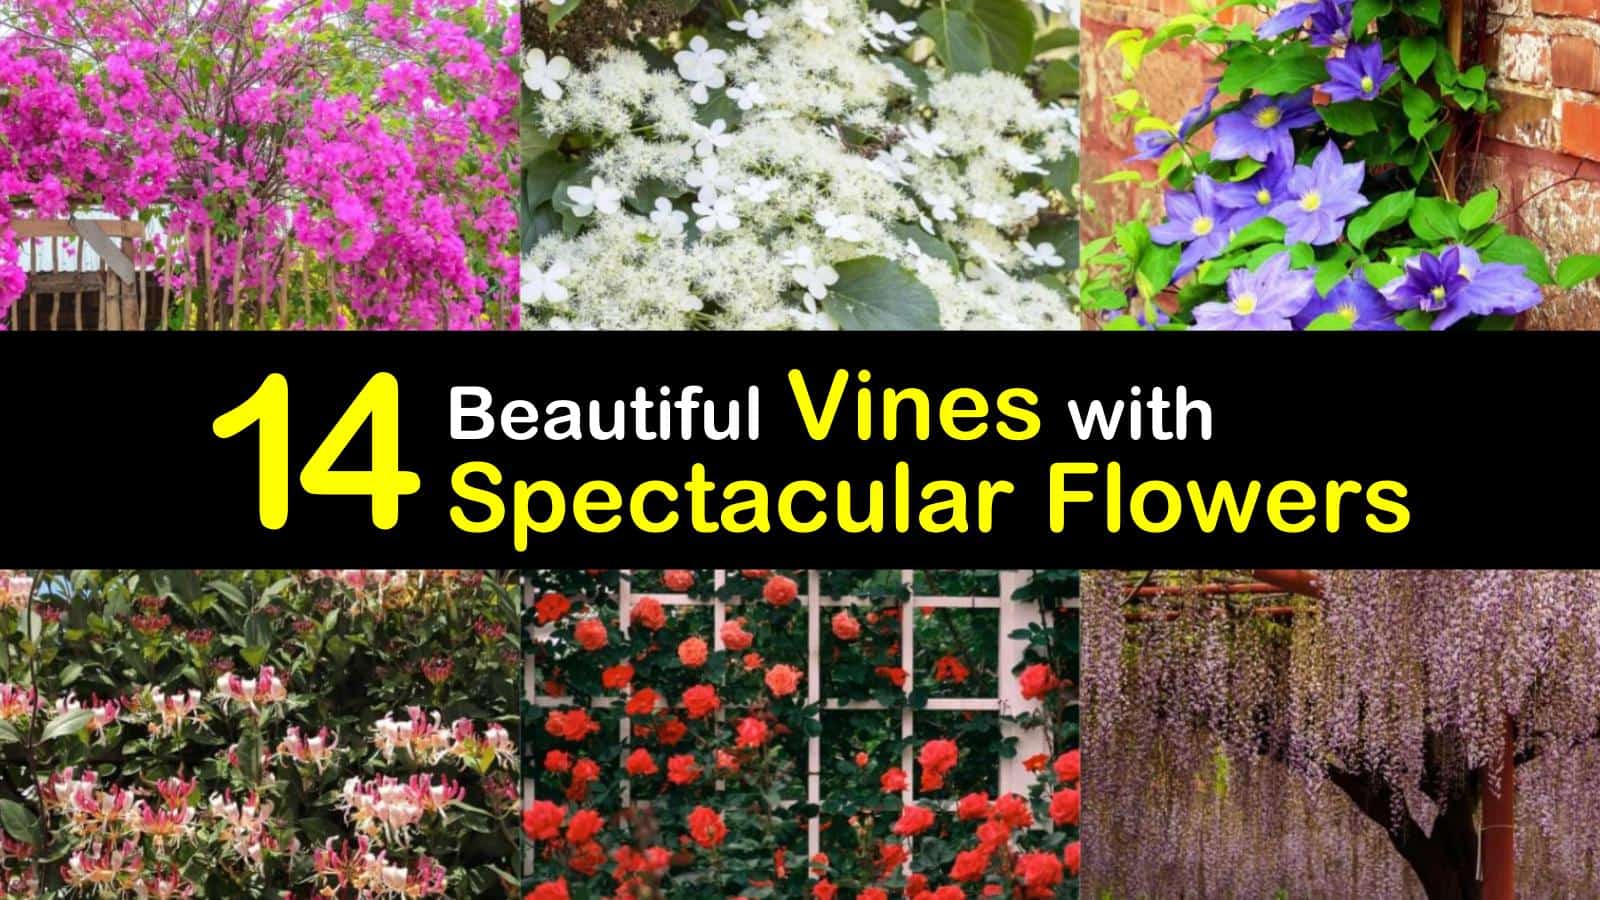 14 Beautiful Vines with Spectacular Flowers